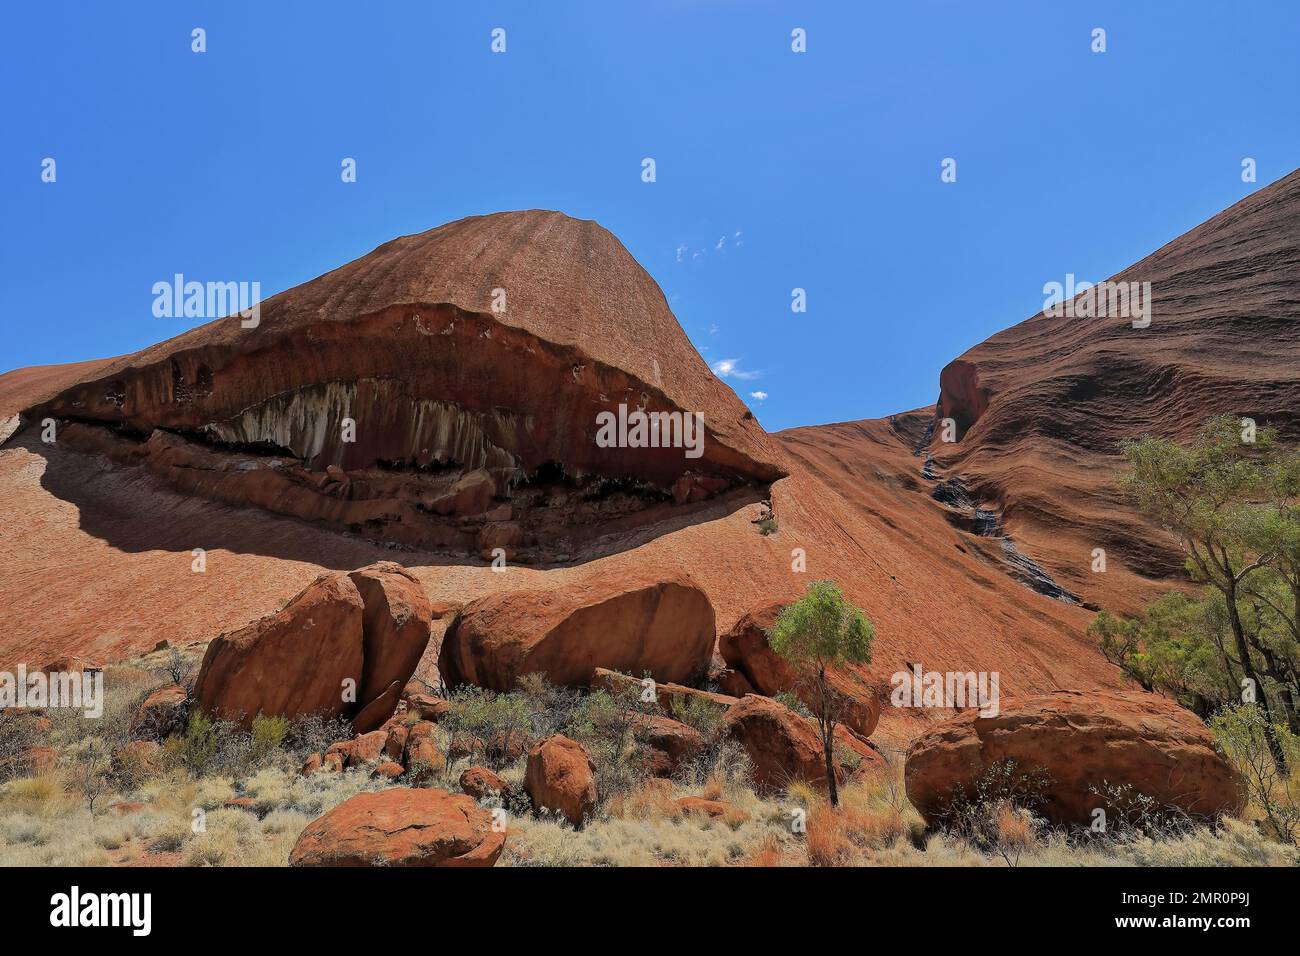 452 Drainage line of dry waterfall-huge crack-boulders at the foot of the grooved southeast face of Uluru-Ayers Rock. NT-Australia. Stock Photo